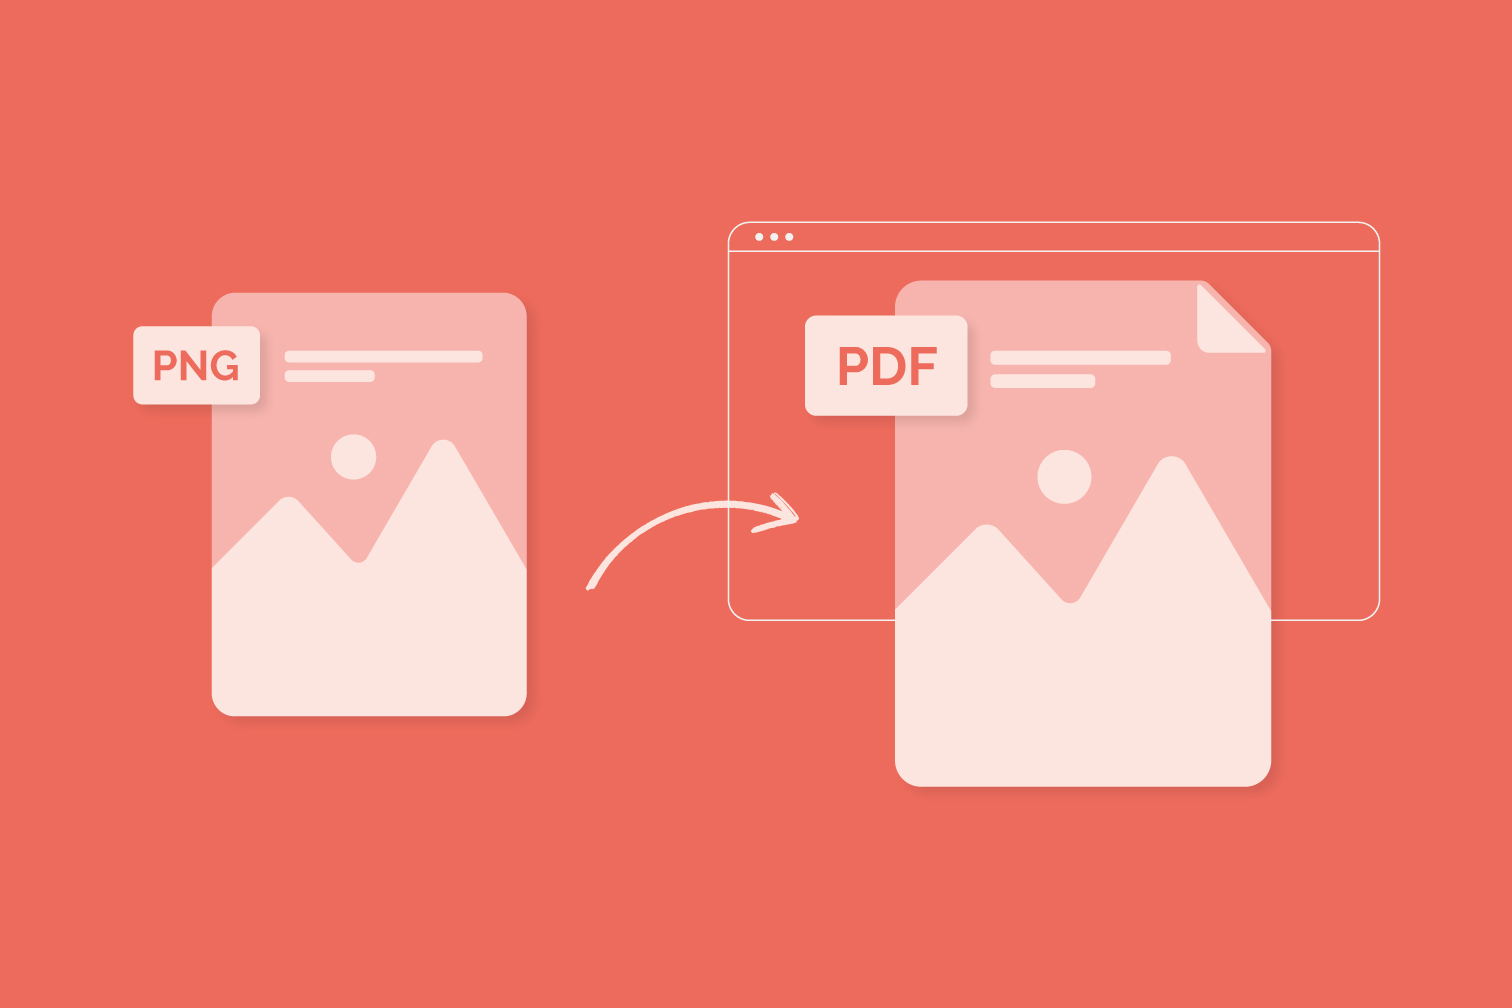 How To Merge & Split Single Or Multiple PDFs Of Any Size